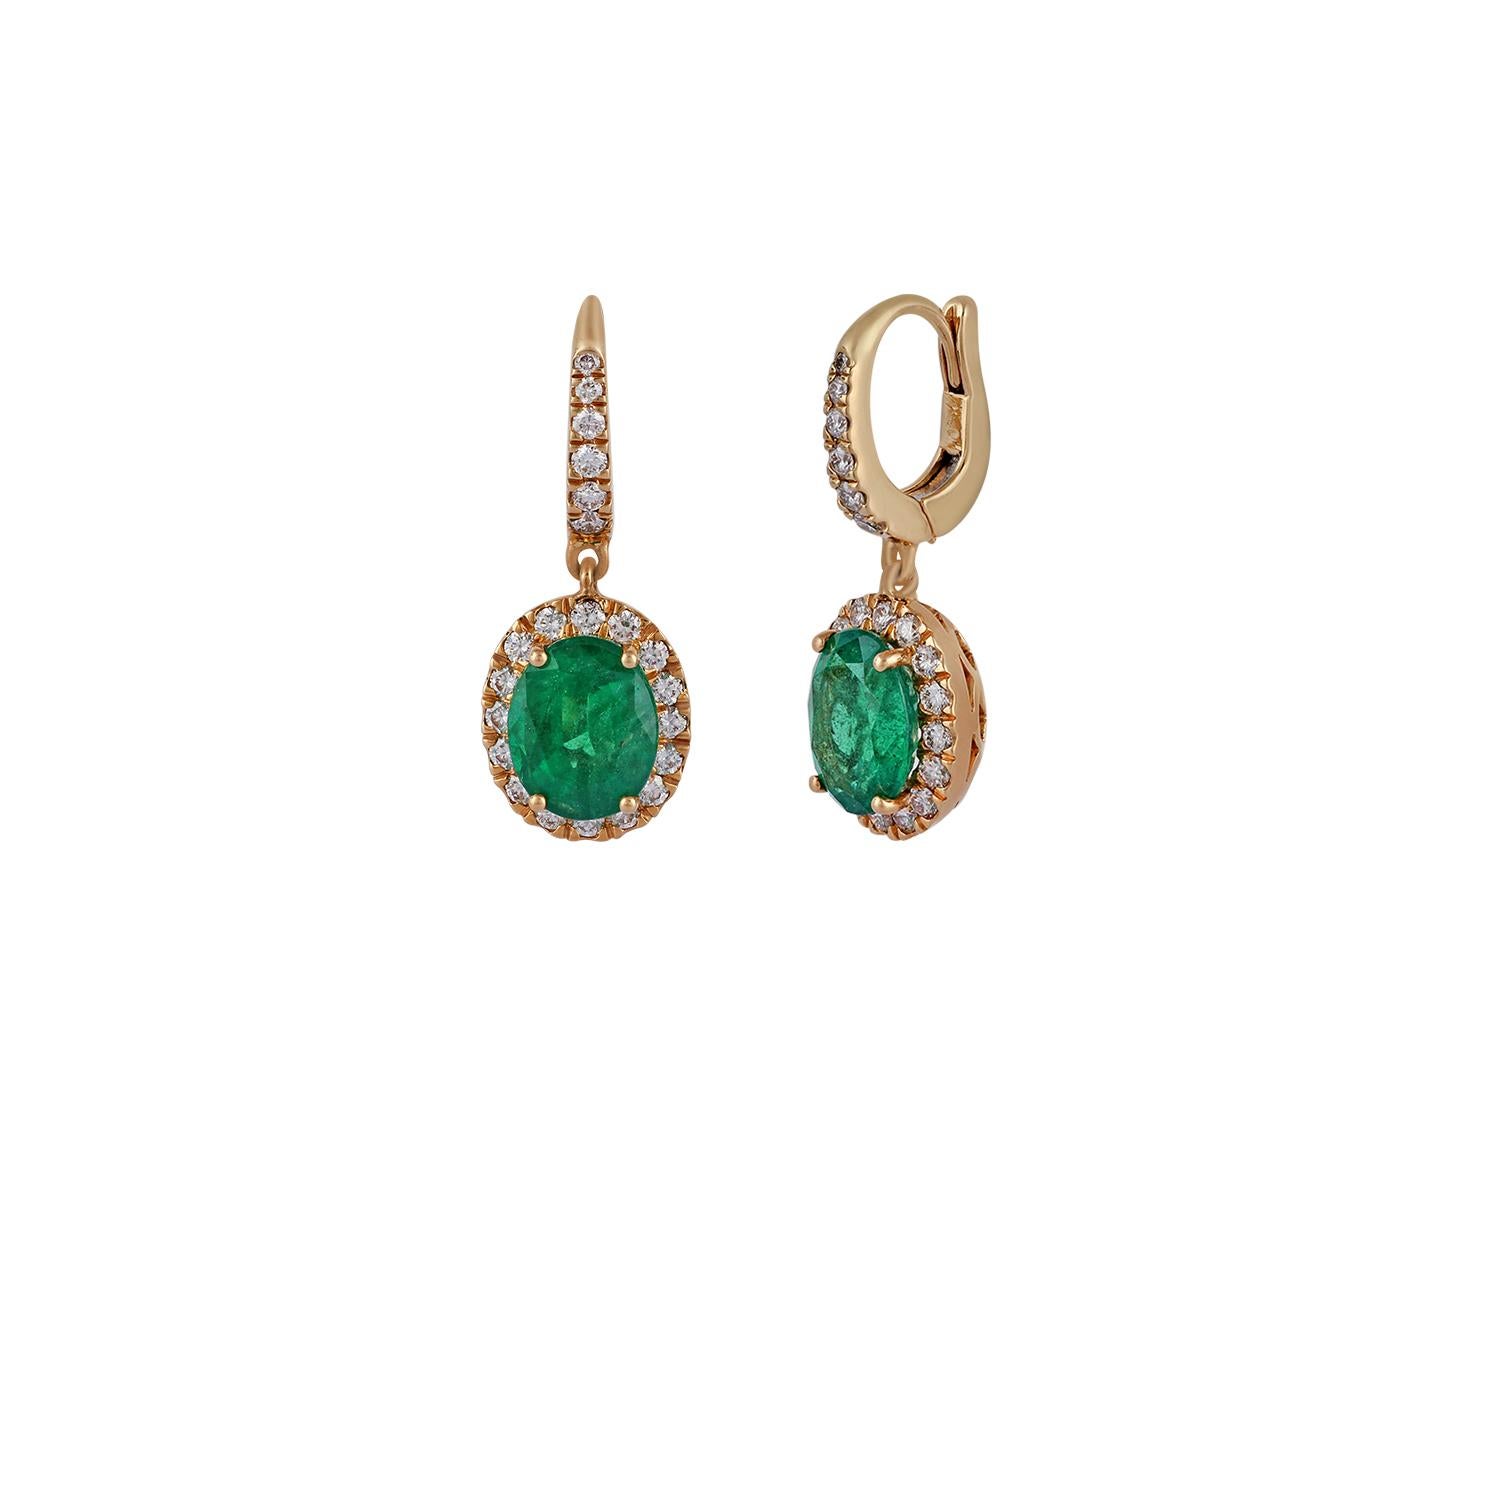 Contemporary  5.15 CaratZambian Emerald and Diamond Earring Studded in 18 Karat Yellow Gold For Sale